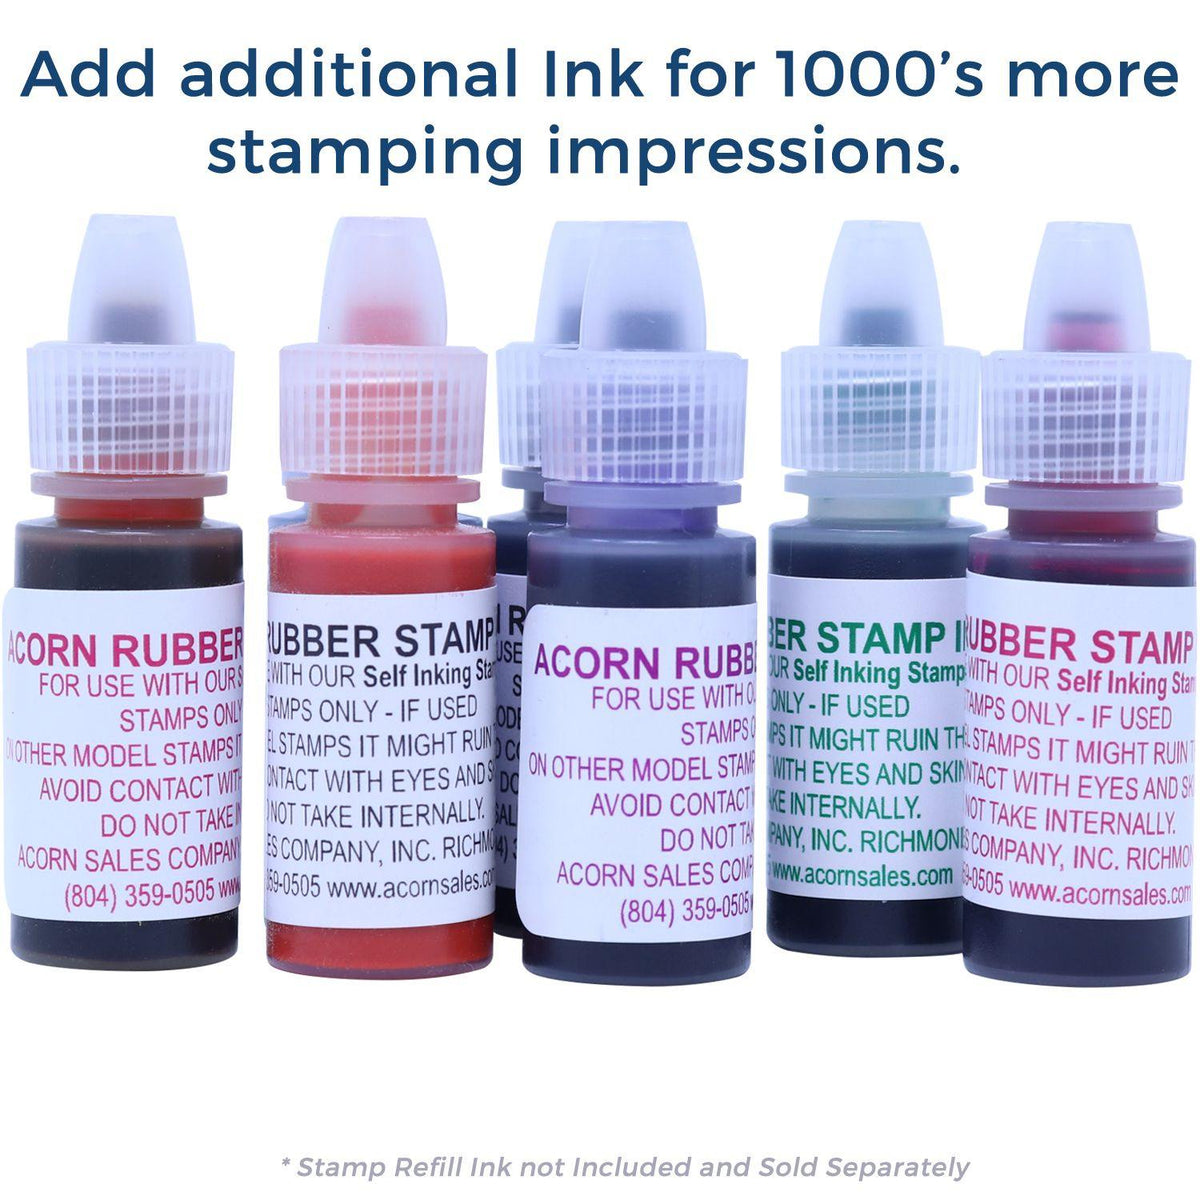 Refill Inks for Large Pre Inked Installment Loan Stamp Available